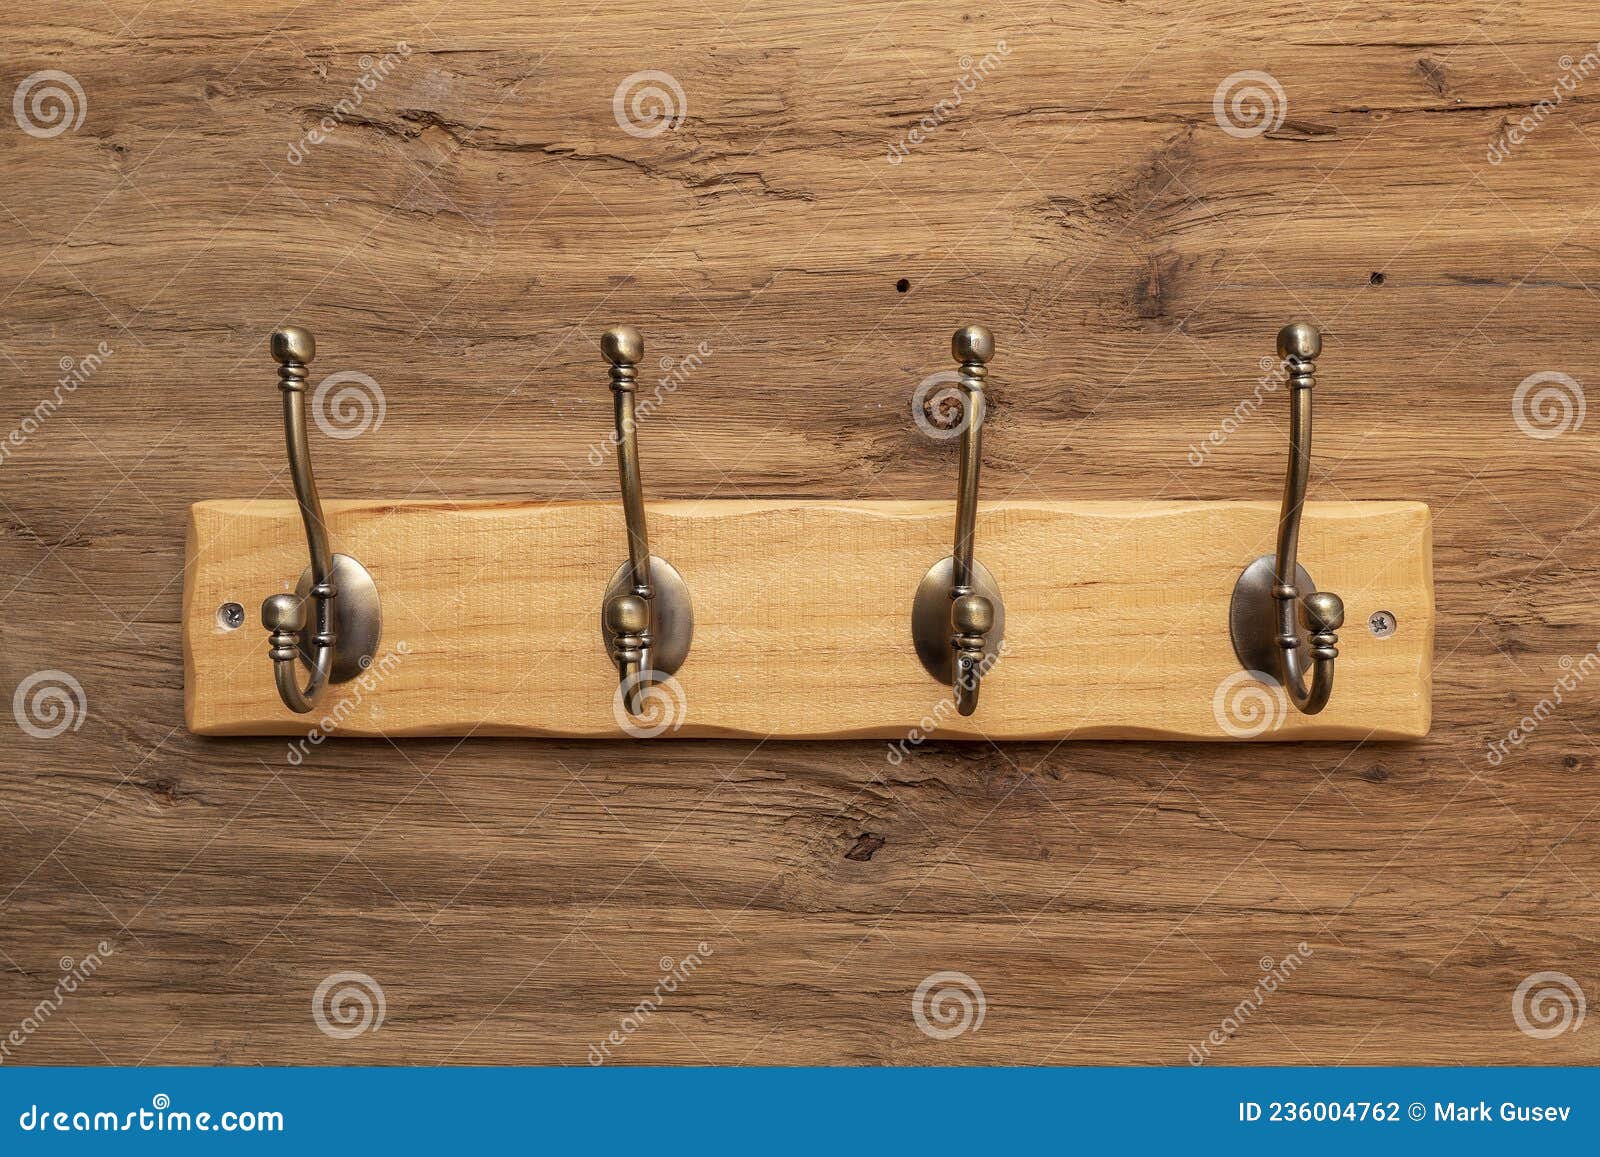 Bronze Metal Hooks for Hanging Clothes Attached To a Wooden Wall